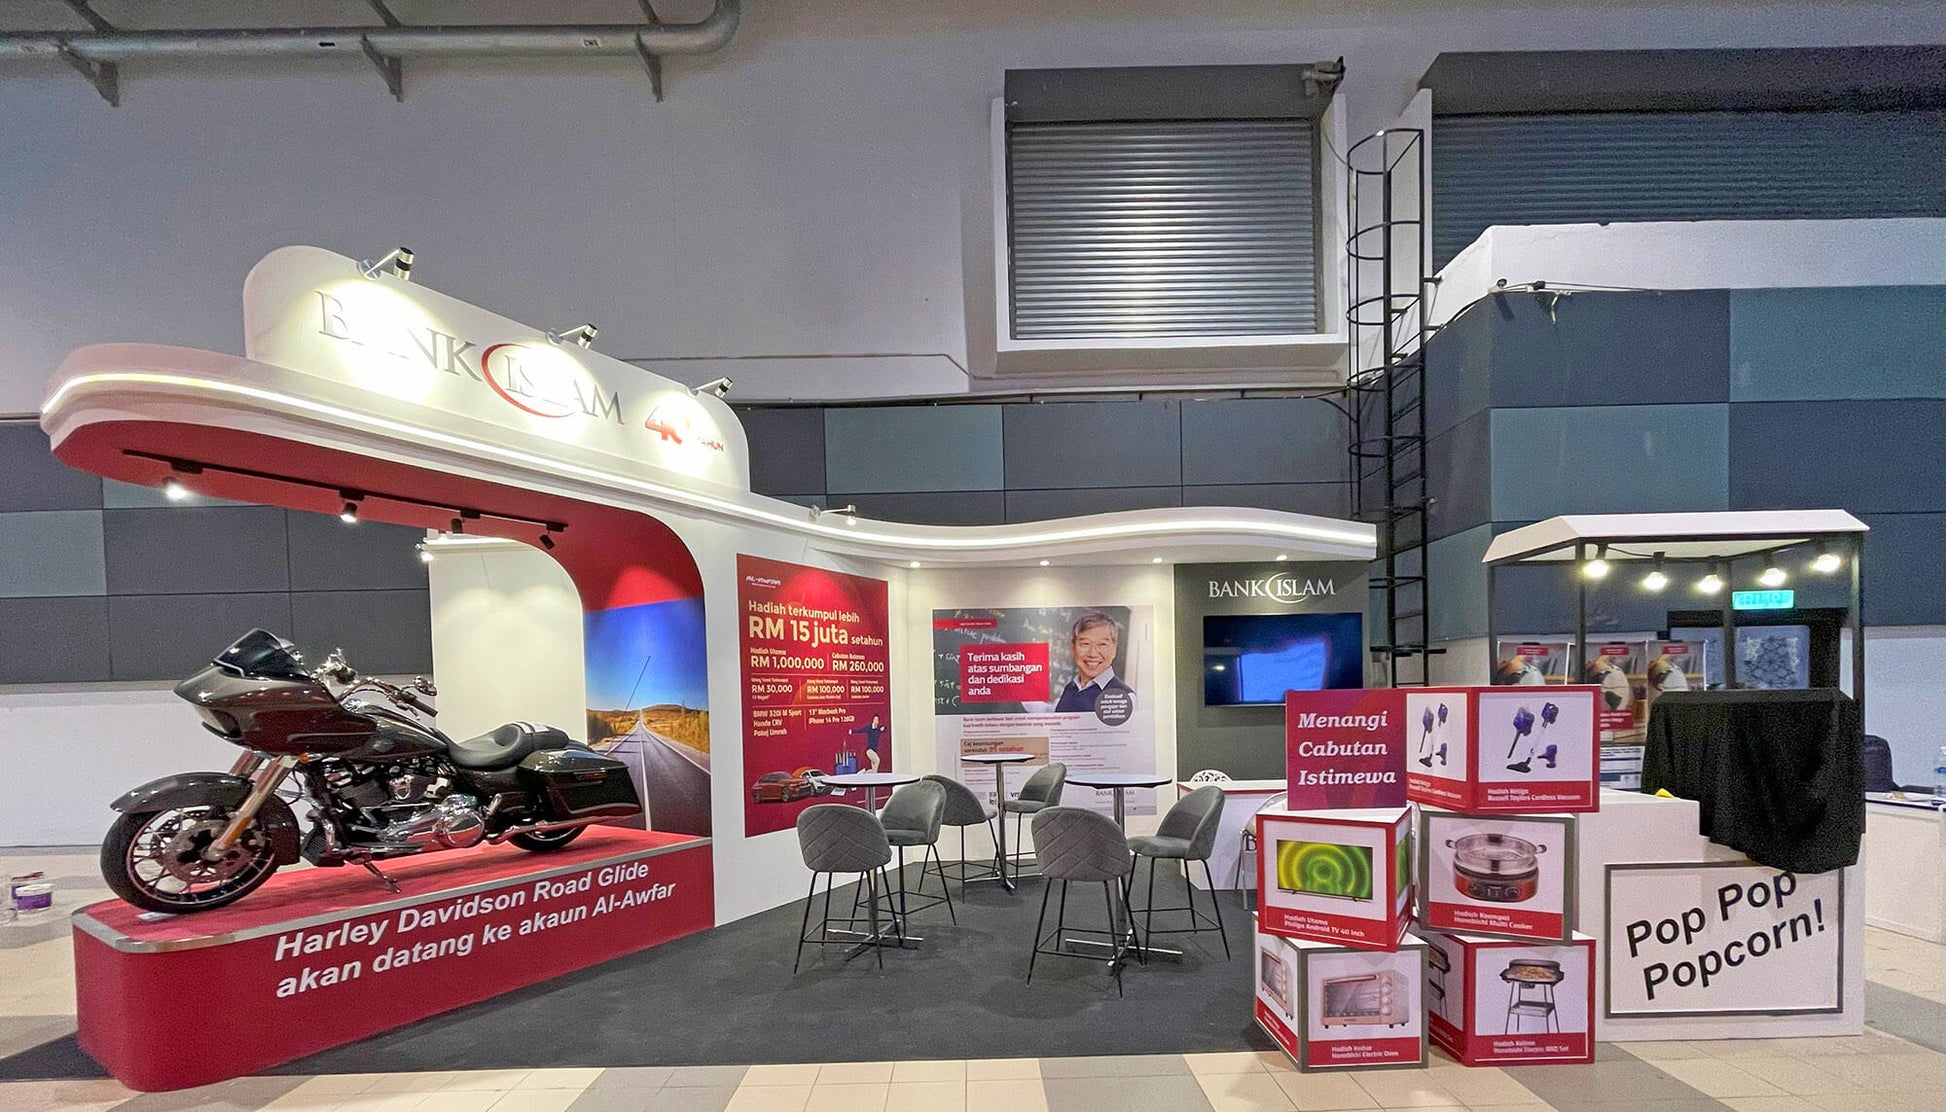 Exhibition Booth for Bank Islam